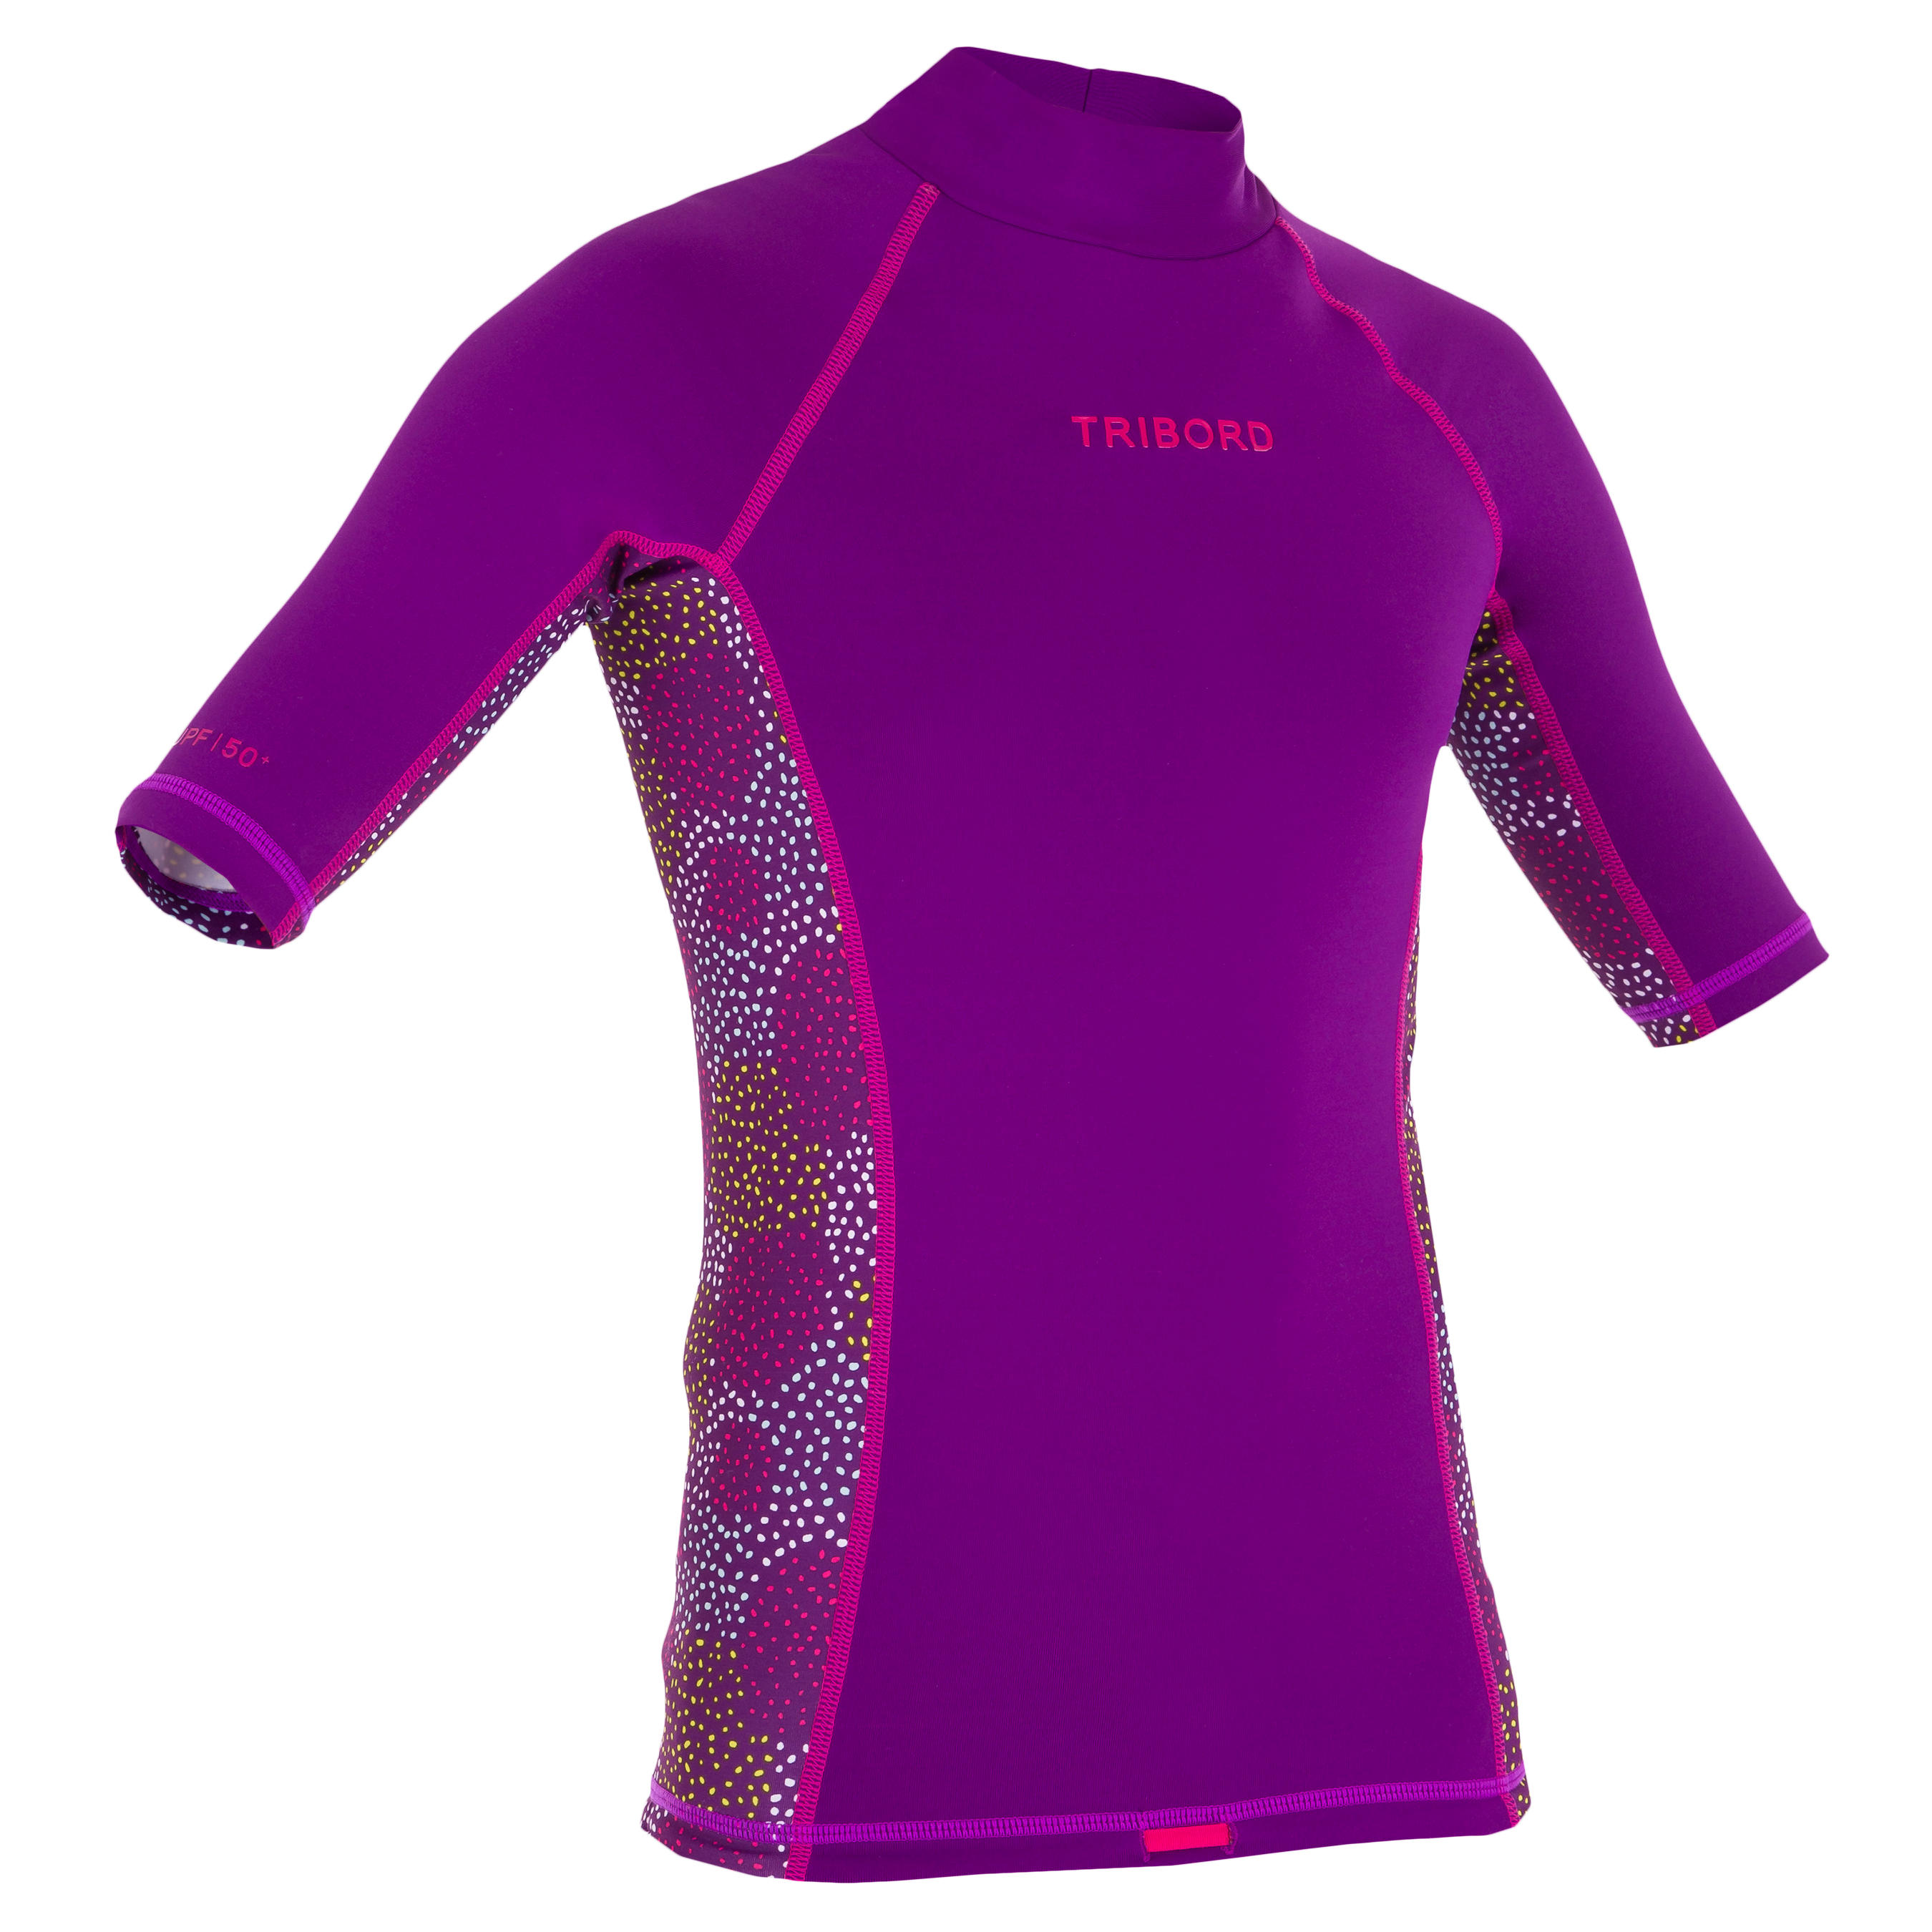 TRIBORD 500 Children's Short Sleeve UV Protection Surfing Top T-Shirt - Purple